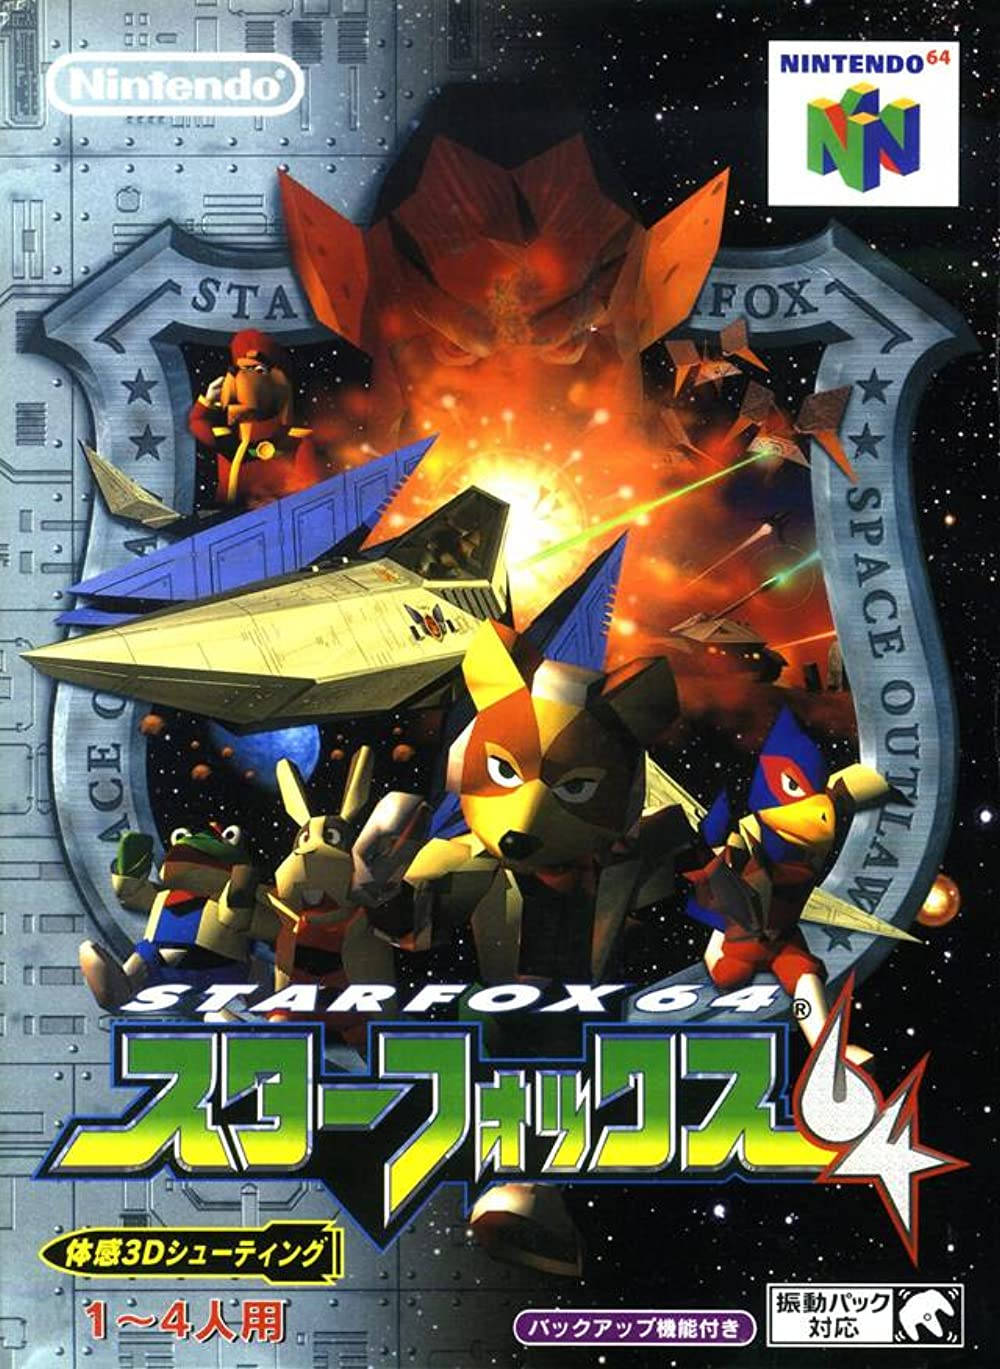 Star Fox 64 Game Poster Background